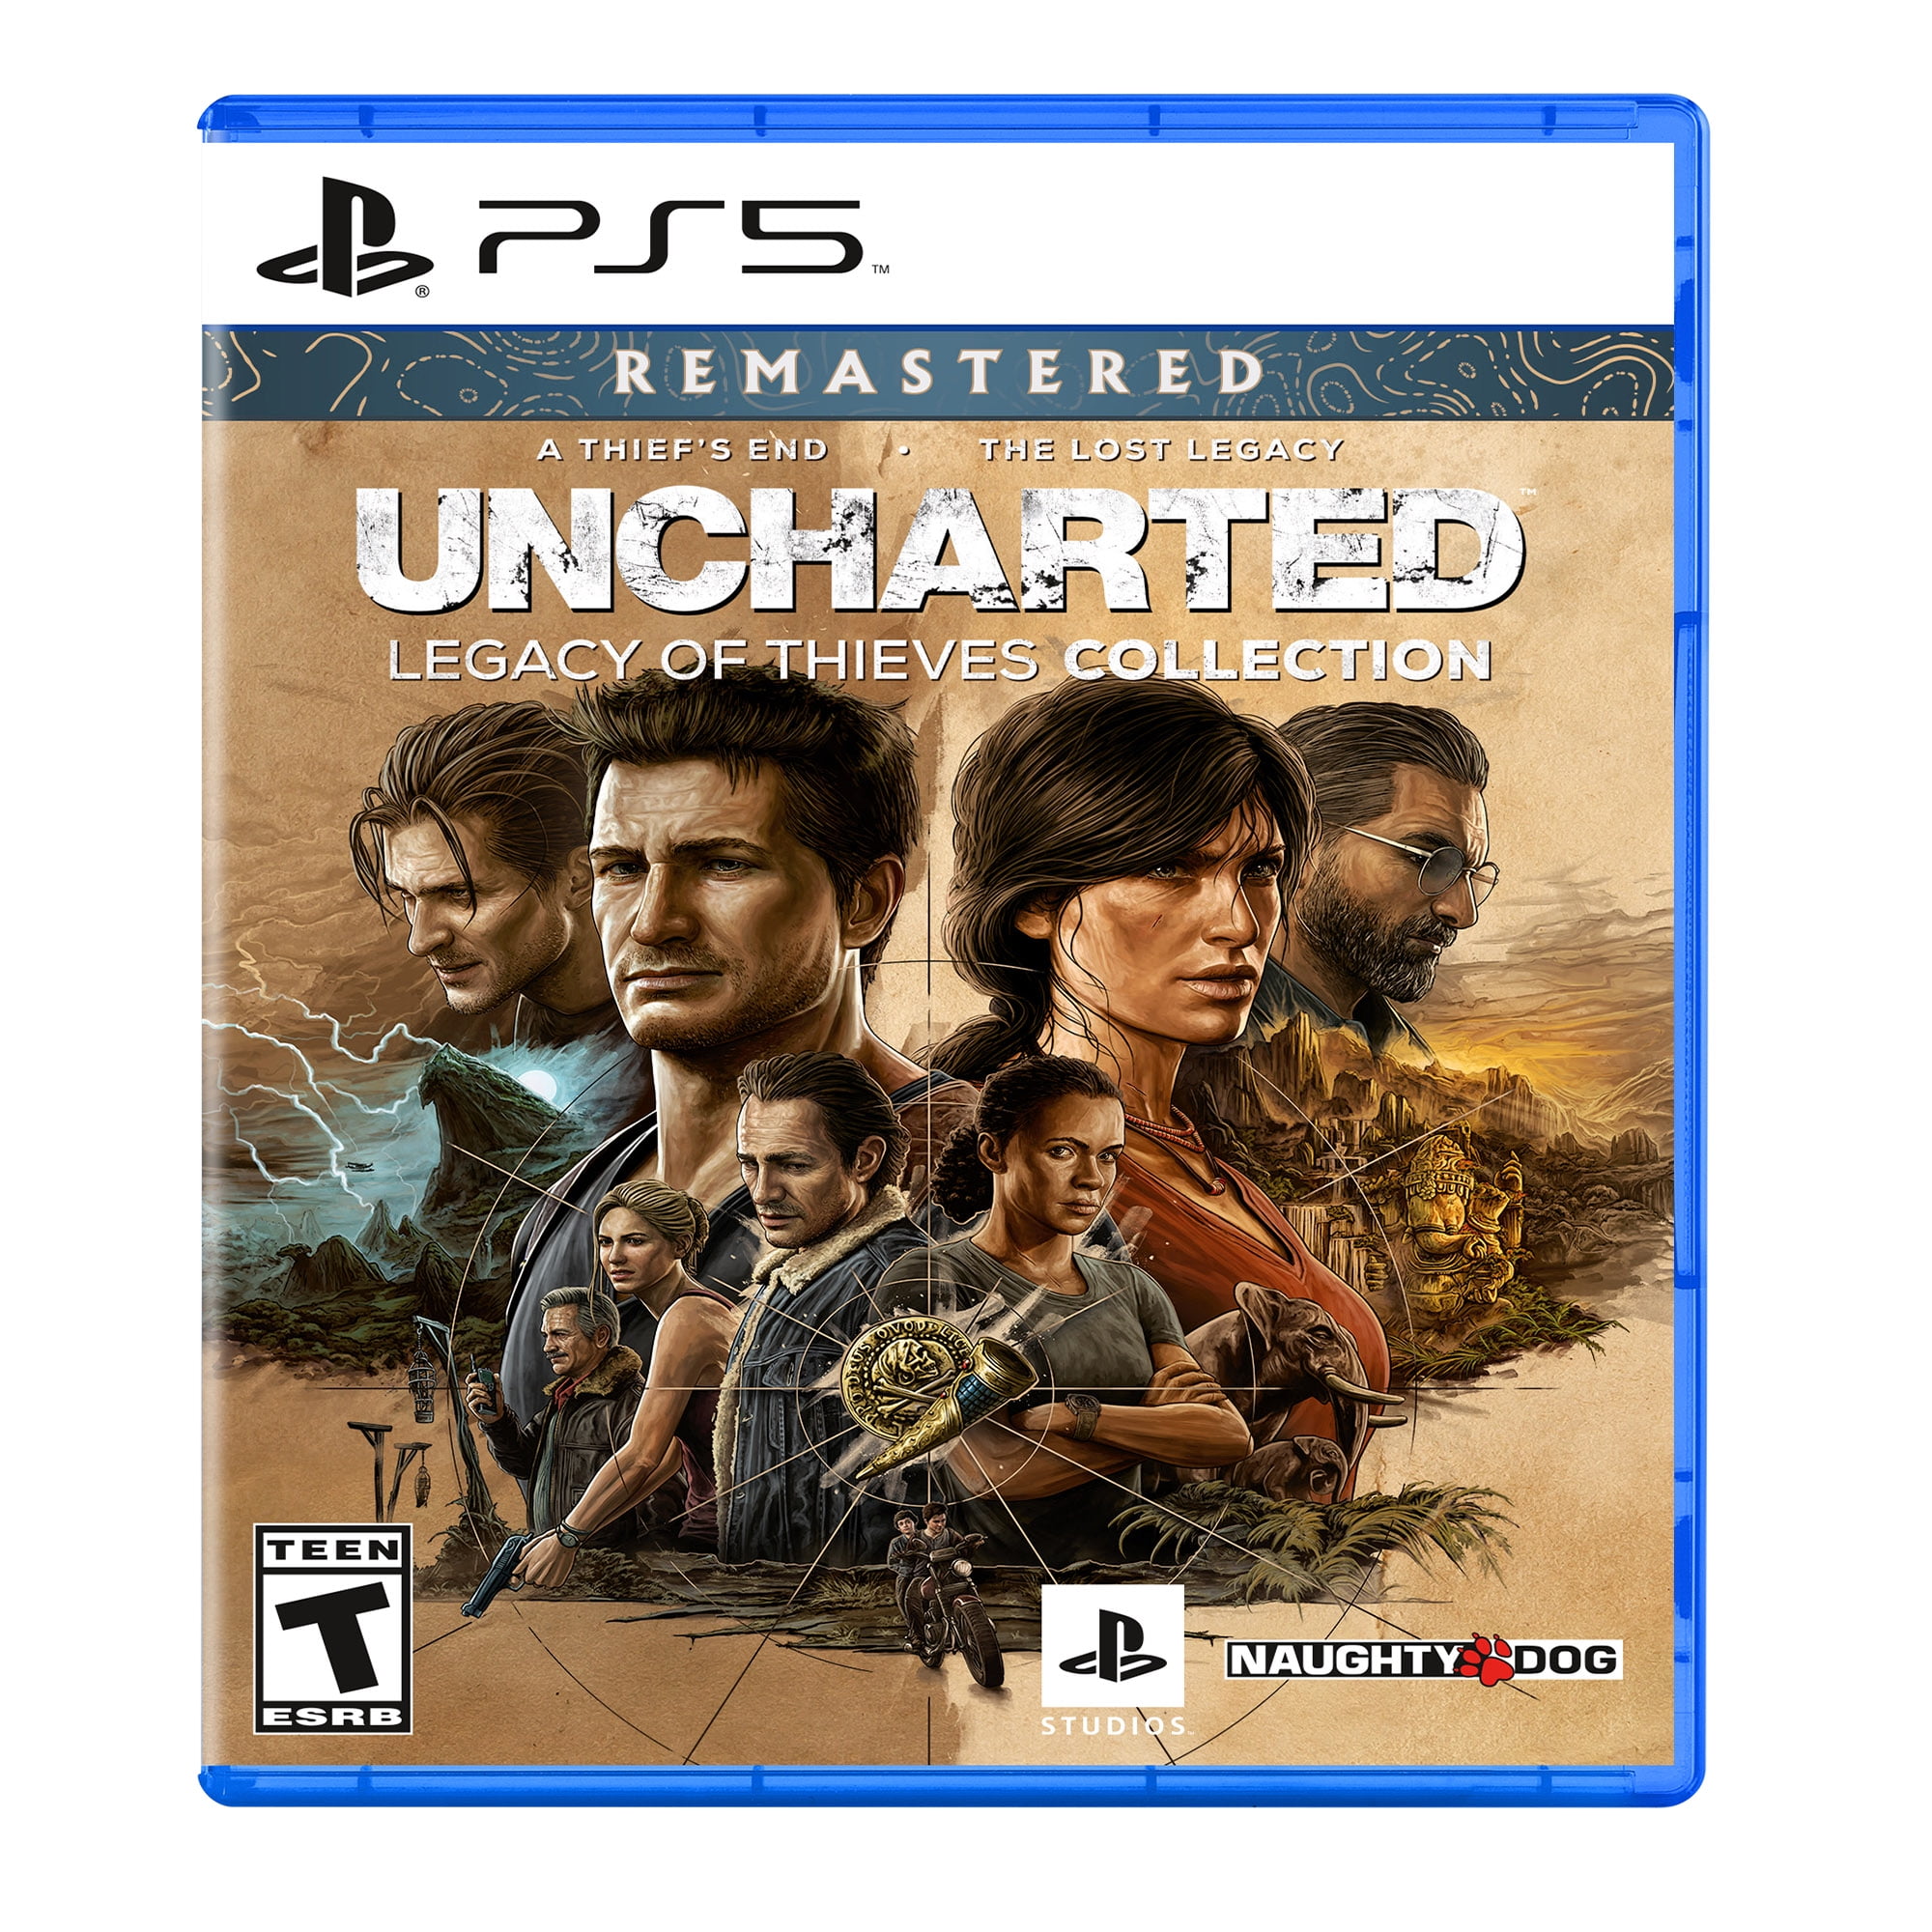 Uncharted: Drake's Fortune Remastered PS4 - Where to Find All 61 Treasures  - Guide